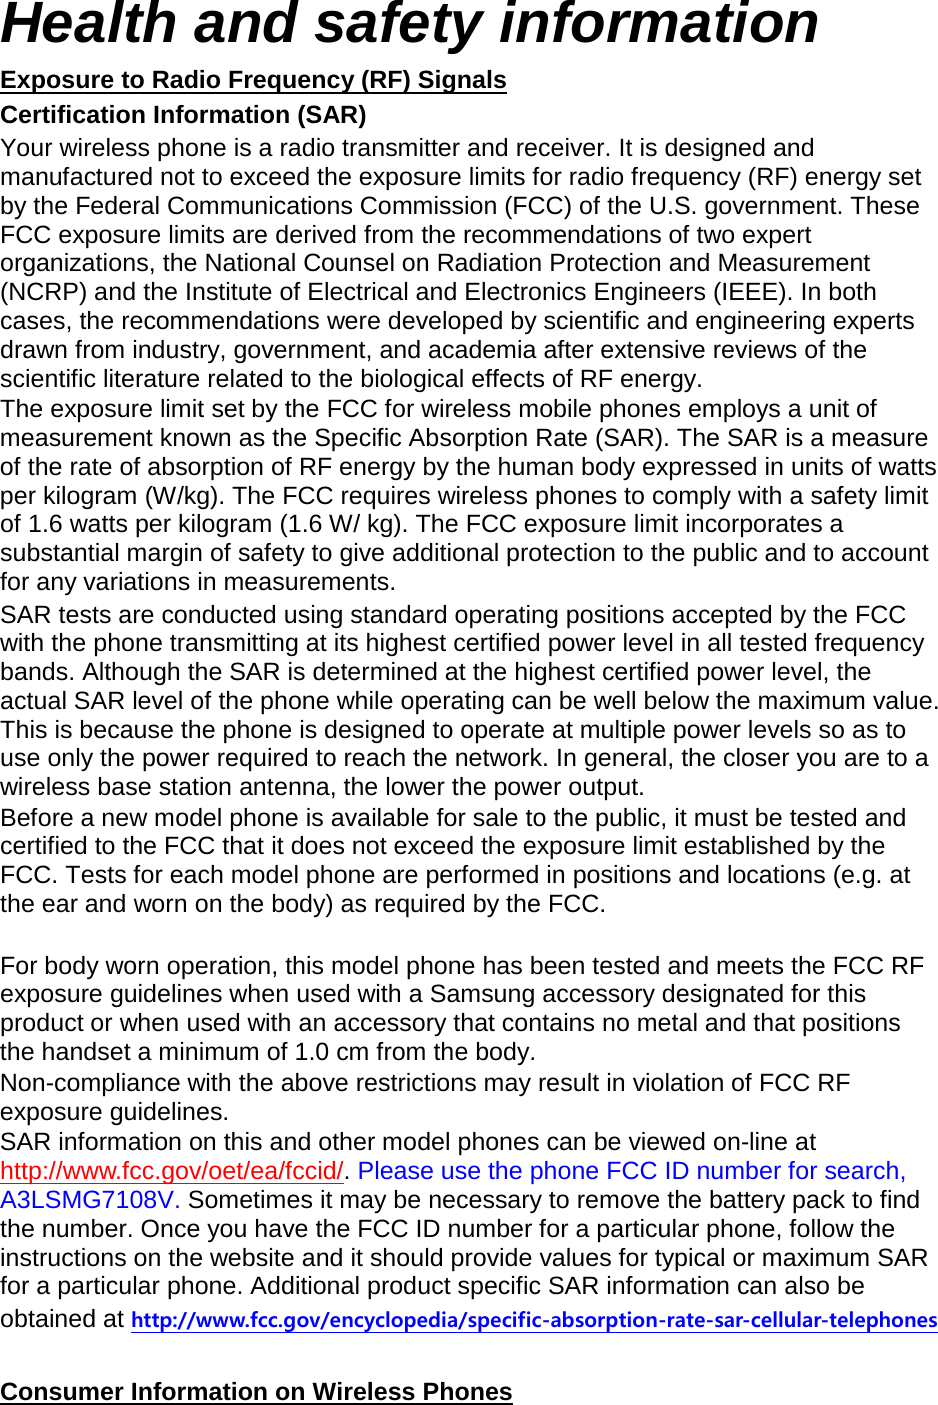 Health and safety information Exposure to Radio Frequency (RF) Signals Certification Information (SAR) Your wireless phone is a radio transmitter and receiver. It is designed and manufactured not to exceed the exposure limits for radio frequency (RF) energy set by the Federal Communications Commission (FCC) of the U.S. government. These FCC exposure limits are derived from the recommendations of two expert organizations, the National Counsel on Radiation Protection and Measurement (NCRP) and the Institute of Electrical and Electronics Engineers (IEEE). In both cases, the recommendations were developed by scientific and engineering experts drawn from industry, government, and academia after extensive reviews of the scientific literature related to the biological effects of RF energy. The exposure limit set by the FCC for wireless mobile phones employs a unit of measurement known as the Specific Absorption Rate (SAR). The SAR is a measure of the rate of absorption of RF energy by the human body expressed in units of watts per kilogram (W/kg). The FCC requires wireless phones to comply with a safety limit of 1.6 watts per kilogram (1.6 W/ kg). The FCC exposure limit incorporates a substantial margin of safety to give additional protection to the public and to account for any variations in measurements. SAR tests are conducted using standard operating positions accepted by the FCC with the phone transmitting at its highest certified power level in all tested frequency bands. Although the SAR is determined at the highest certified power level, the actual SAR level of the phone while operating can be well below the maximum value. This is because the phone is designed to operate at multiple power levels so as to use only the power required to reach the network. In general, the closer you are to a wireless base station antenna, the lower the power output. Before a new model phone is available for sale to the public, it must be tested and certified to the FCC that it does not exceed the exposure limit established by the FCC. Tests for each model phone are performed in positions and locations (e.g. at the ear and worn on the body) as required by the FCC.      For body worn operation, this model phone has been tested and meets the FCC RF exposure guidelines when used with a Samsung accessory designated for this product or when used with an accessory that contains no metal and that positions the handset a minimum of 1.0 cm from the body.   Non-compliance with the above restrictions may result in violation of FCC RF exposure guidelines. SAR information on this and other model phones can be viewed on-line at http://www.fcc.gov/oet/ea/fccid/. Please use the phone FCC ID number for search, A3LSMG7108V. Sometimes it may be necessary to remove the battery pack to find the number. Once you have the FCC ID number for a particular phone, follow the instructions on the website and it should provide values for typical or maximum SAR for a particular phone. Additional product specific SAR information can also be obtained at http://www.fcc.gov/encyclopedia/specific-absorption-rate-sar-cellular-telephones  Consumer Information on Wireless Phones 